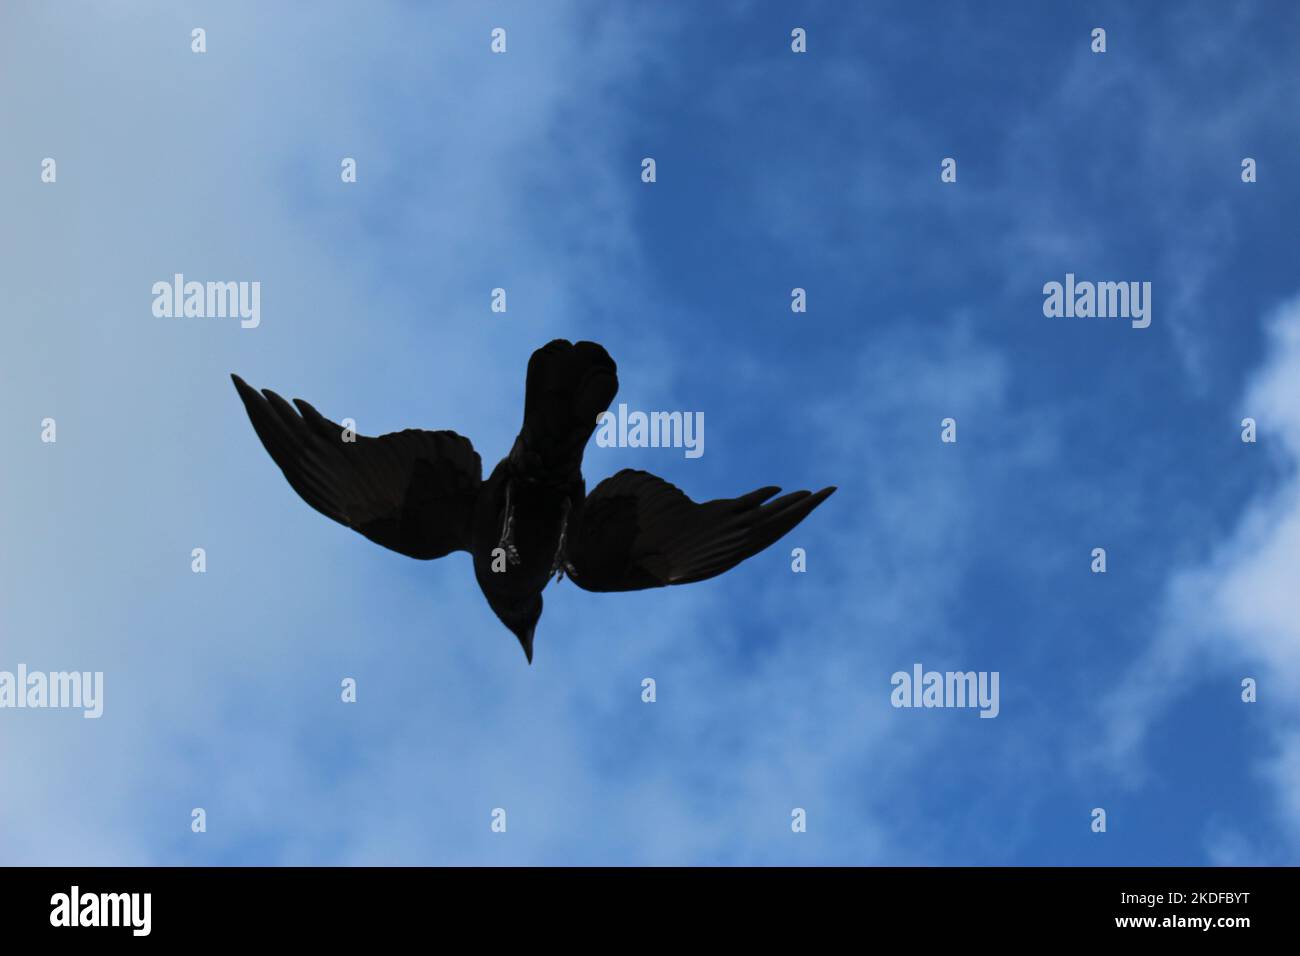 Black crow bird silhouette against a cloudy blue sky - tense with claws out. Concept for soaring, circling over prey Stock Photo